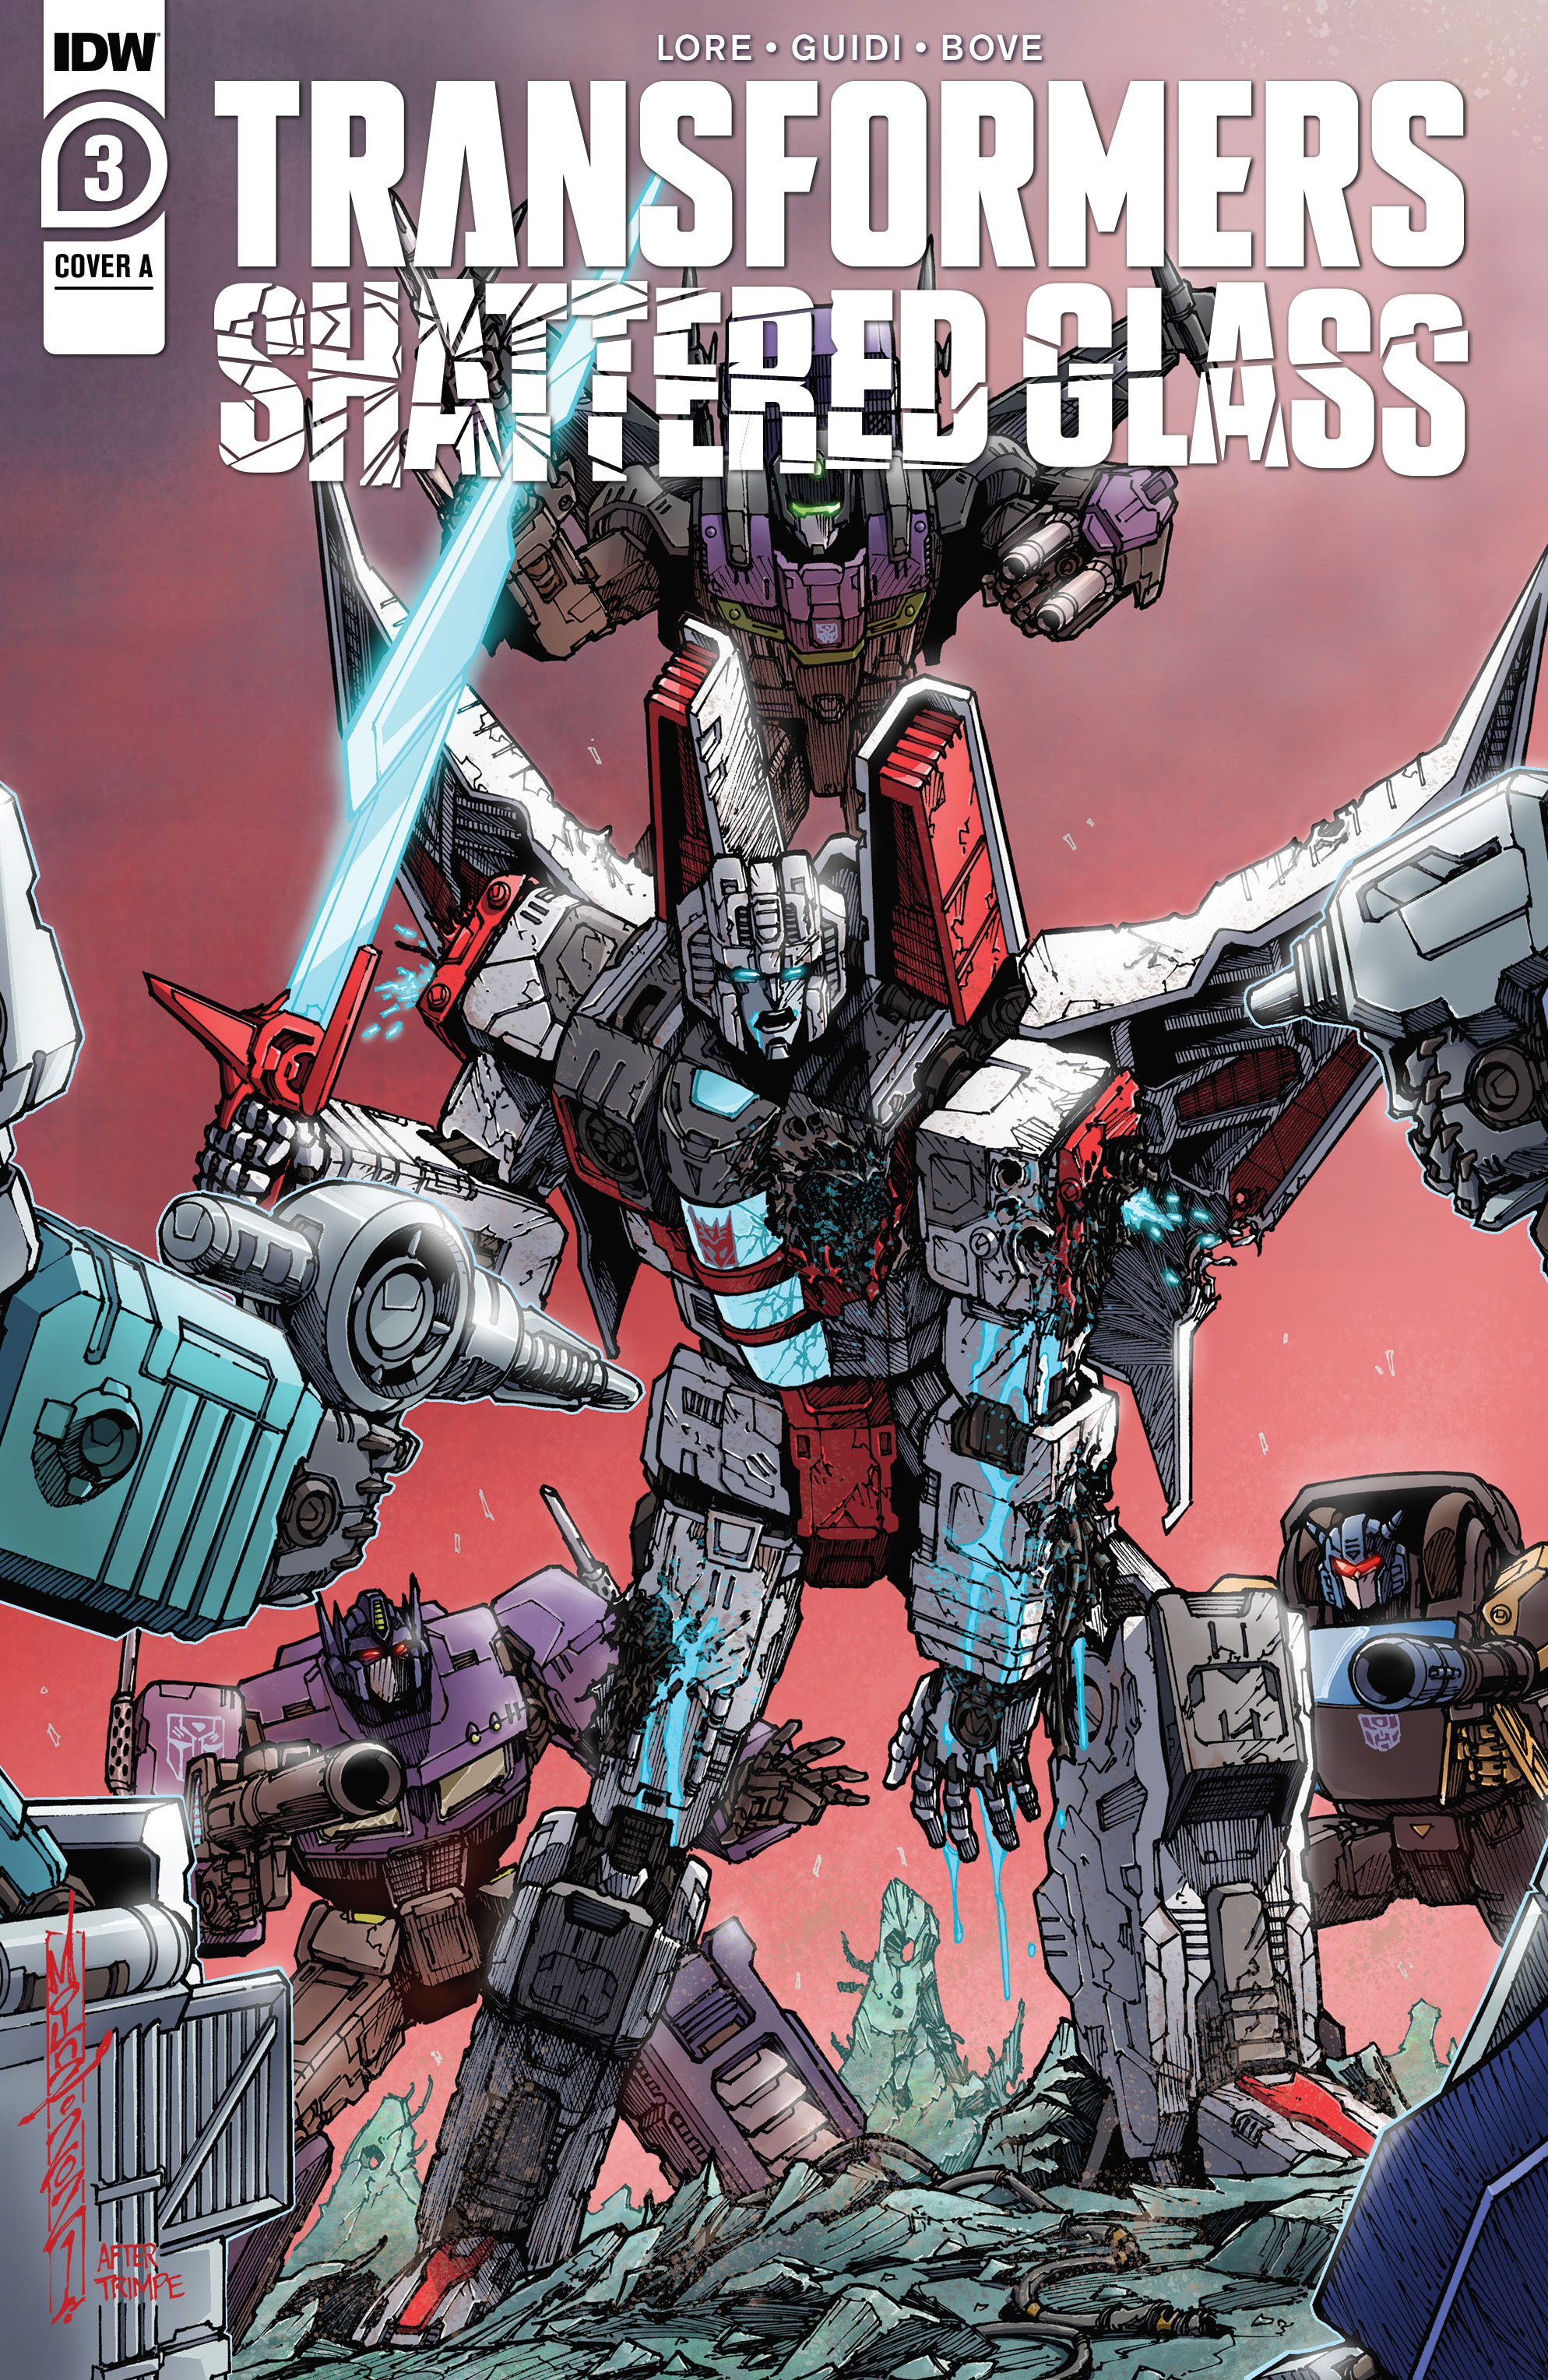 Transformers shattered glass read online